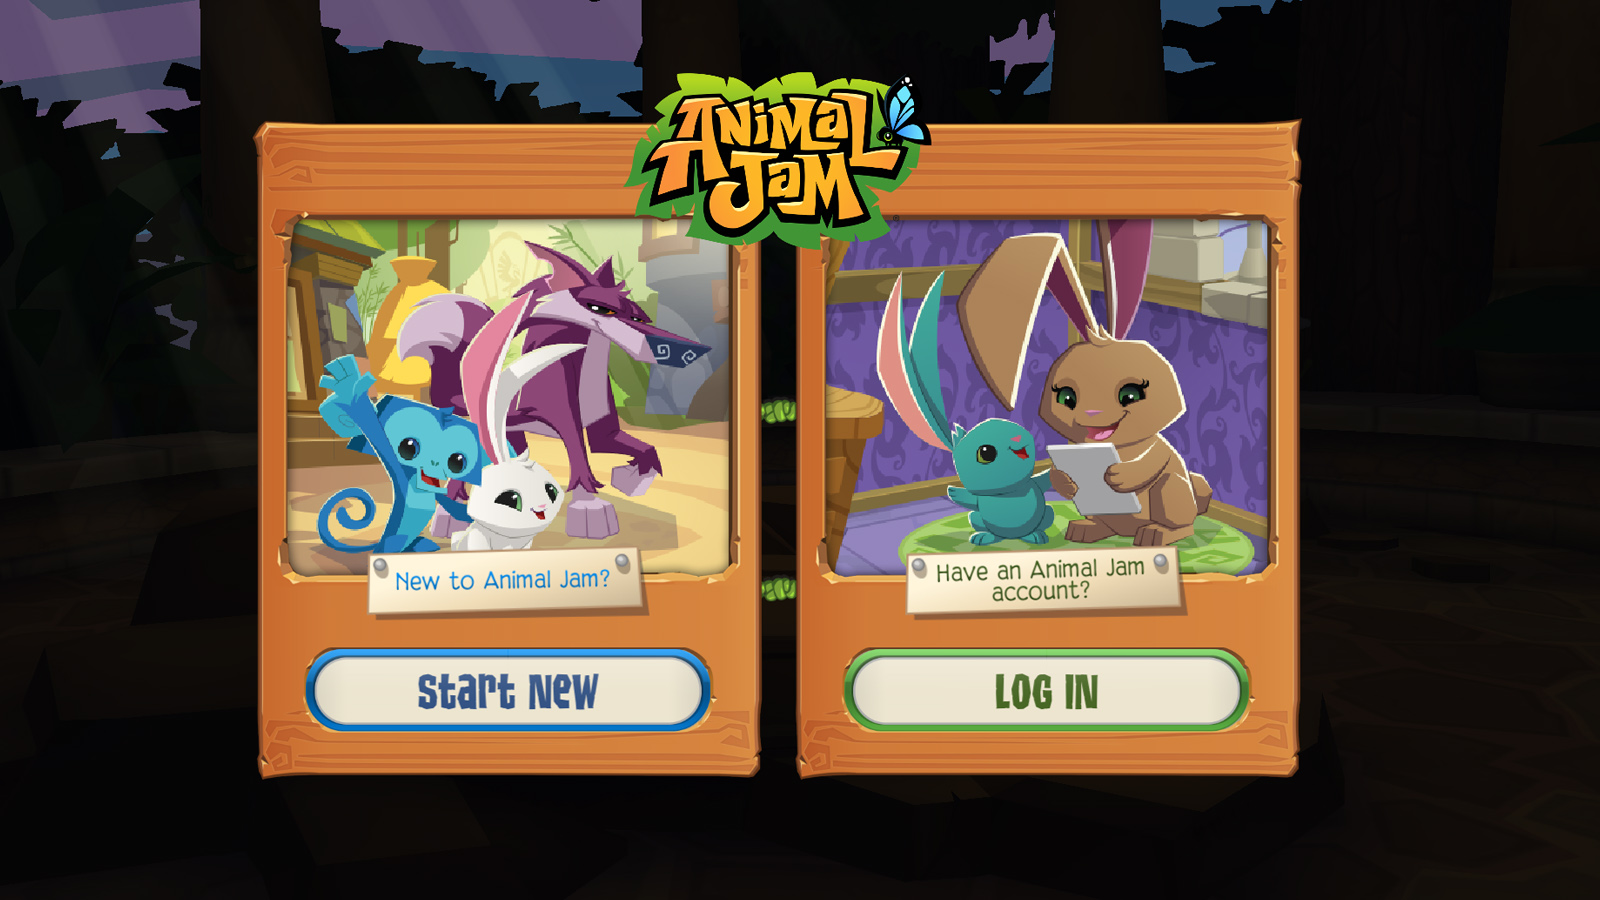 Get feedback from a vast remote working audience about Animal Jam